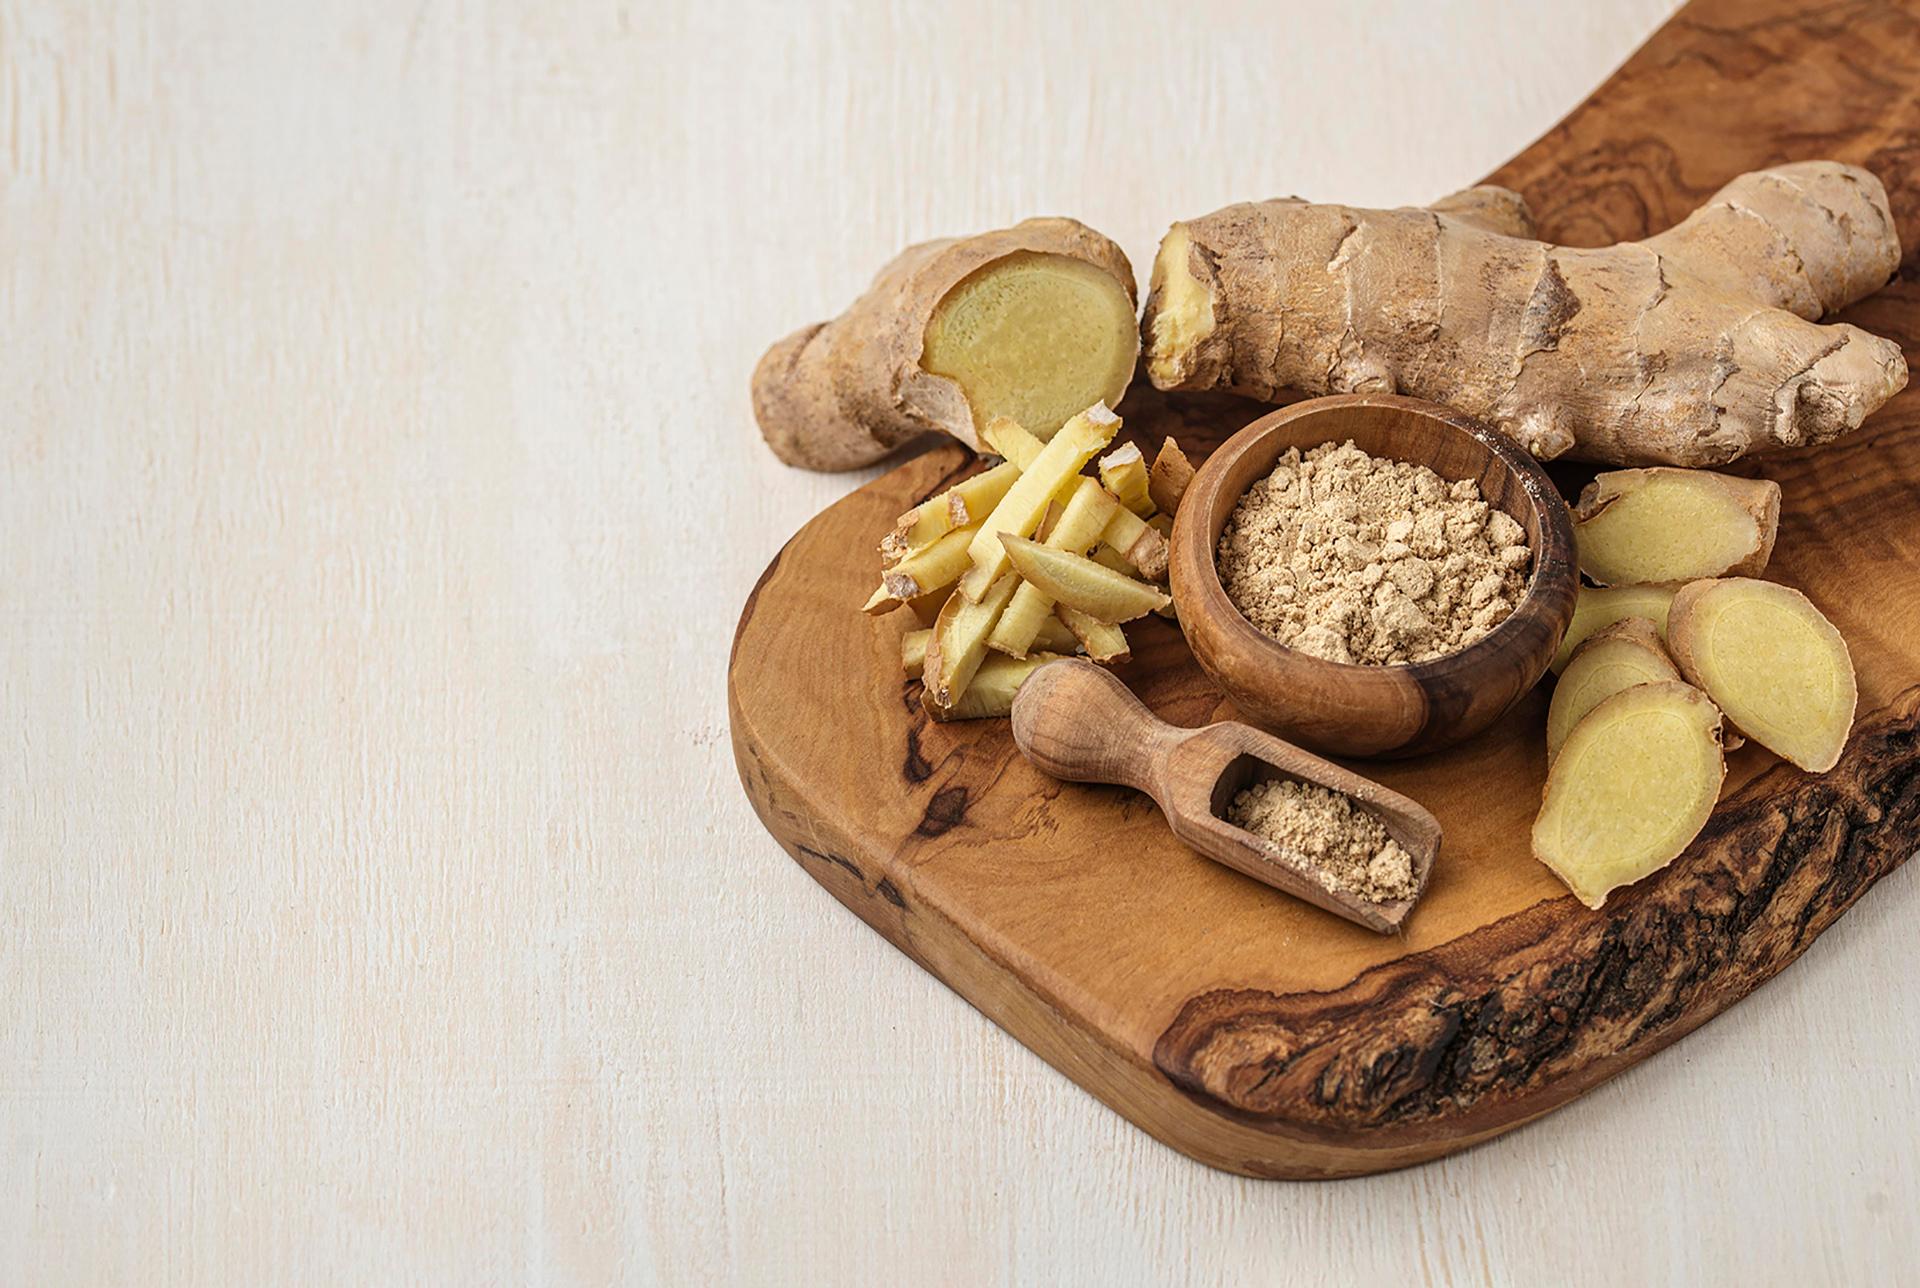 Ginger: Nutritional Value, Benefits, Uses and Side Effects